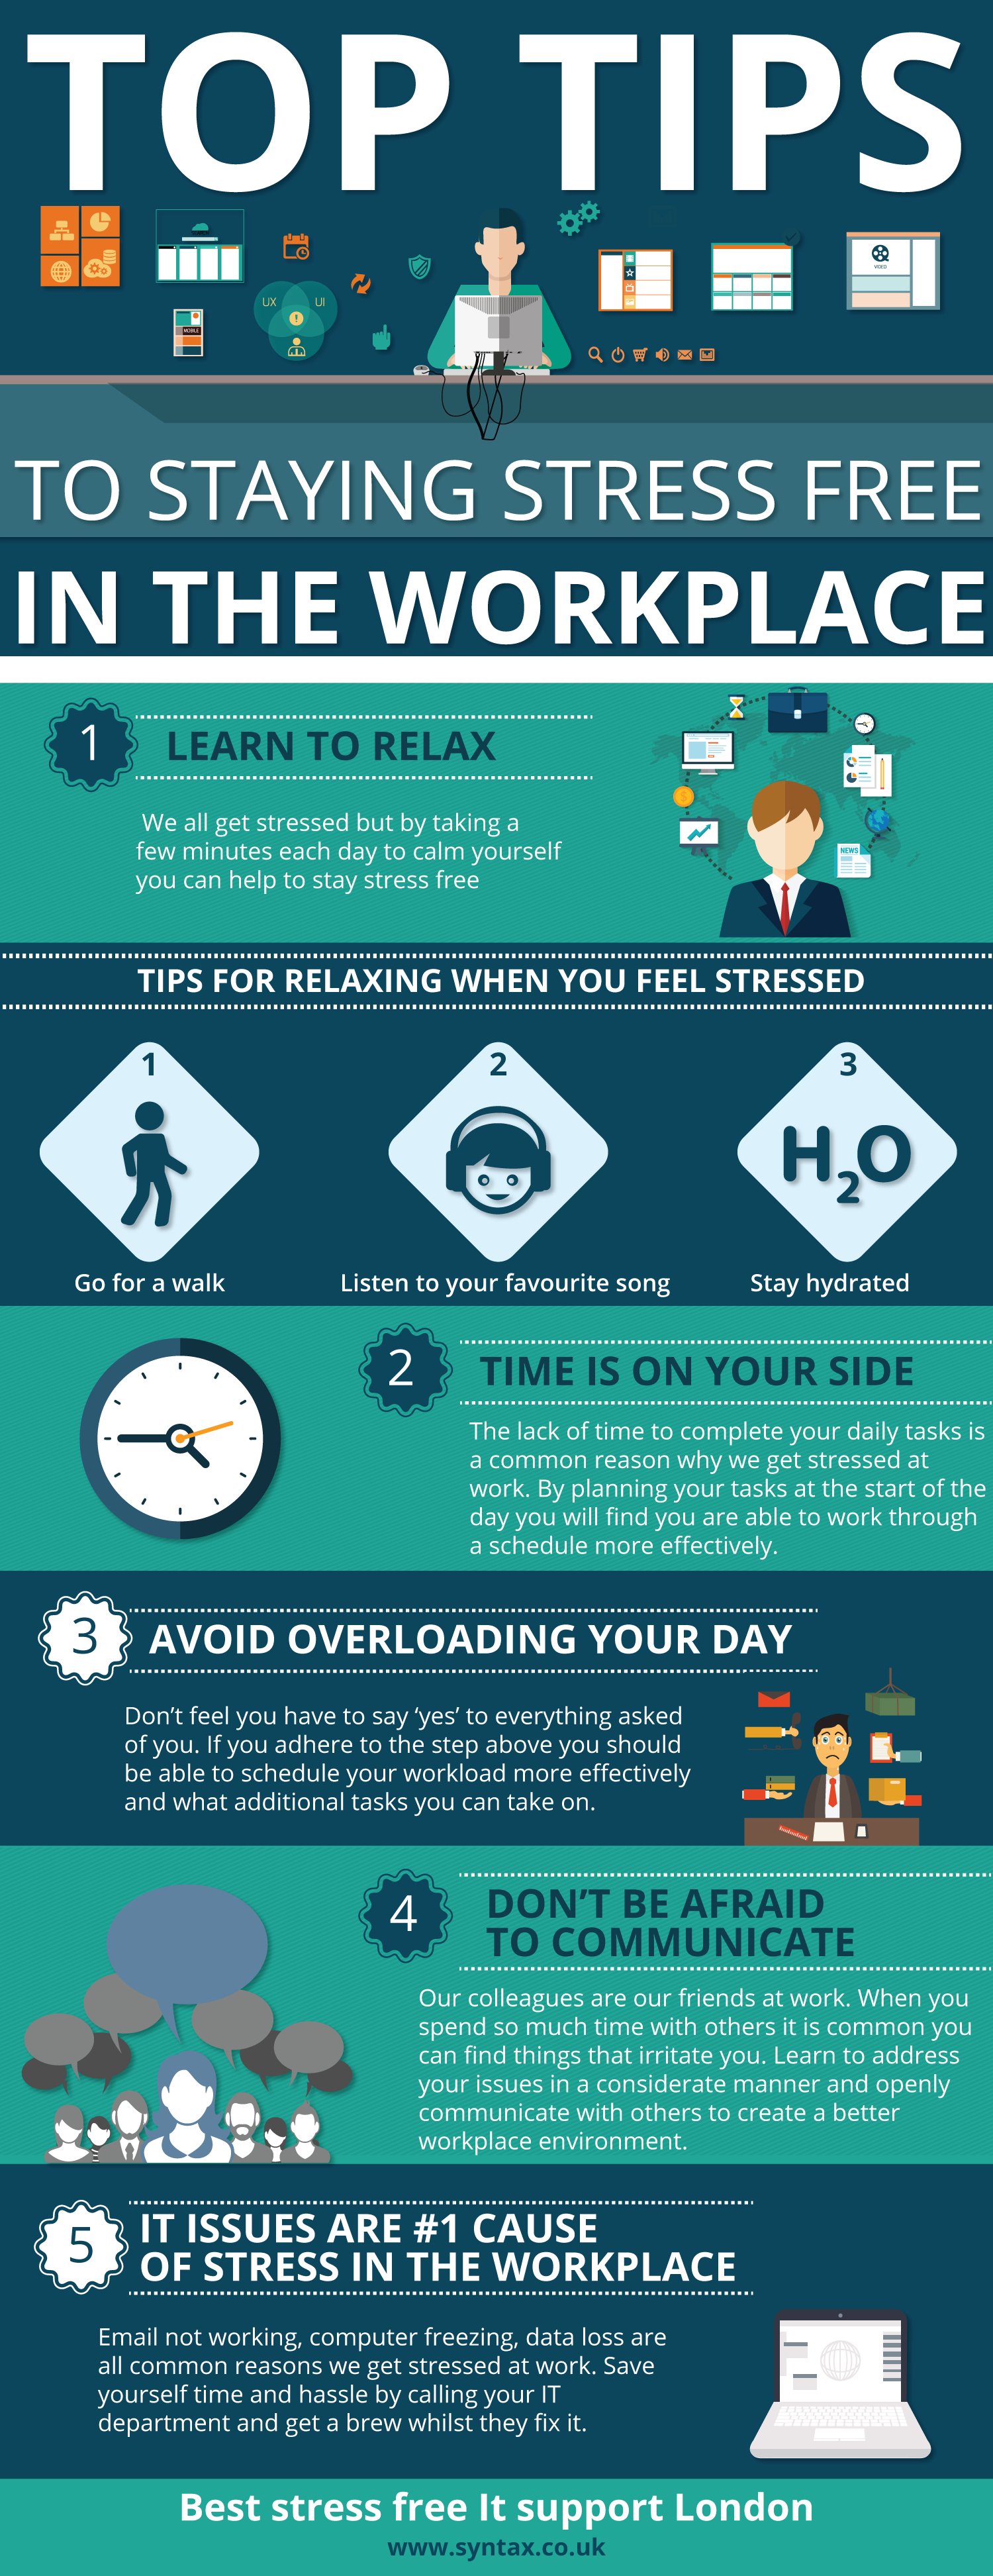 Top Tips To Staying Stress Free at Work